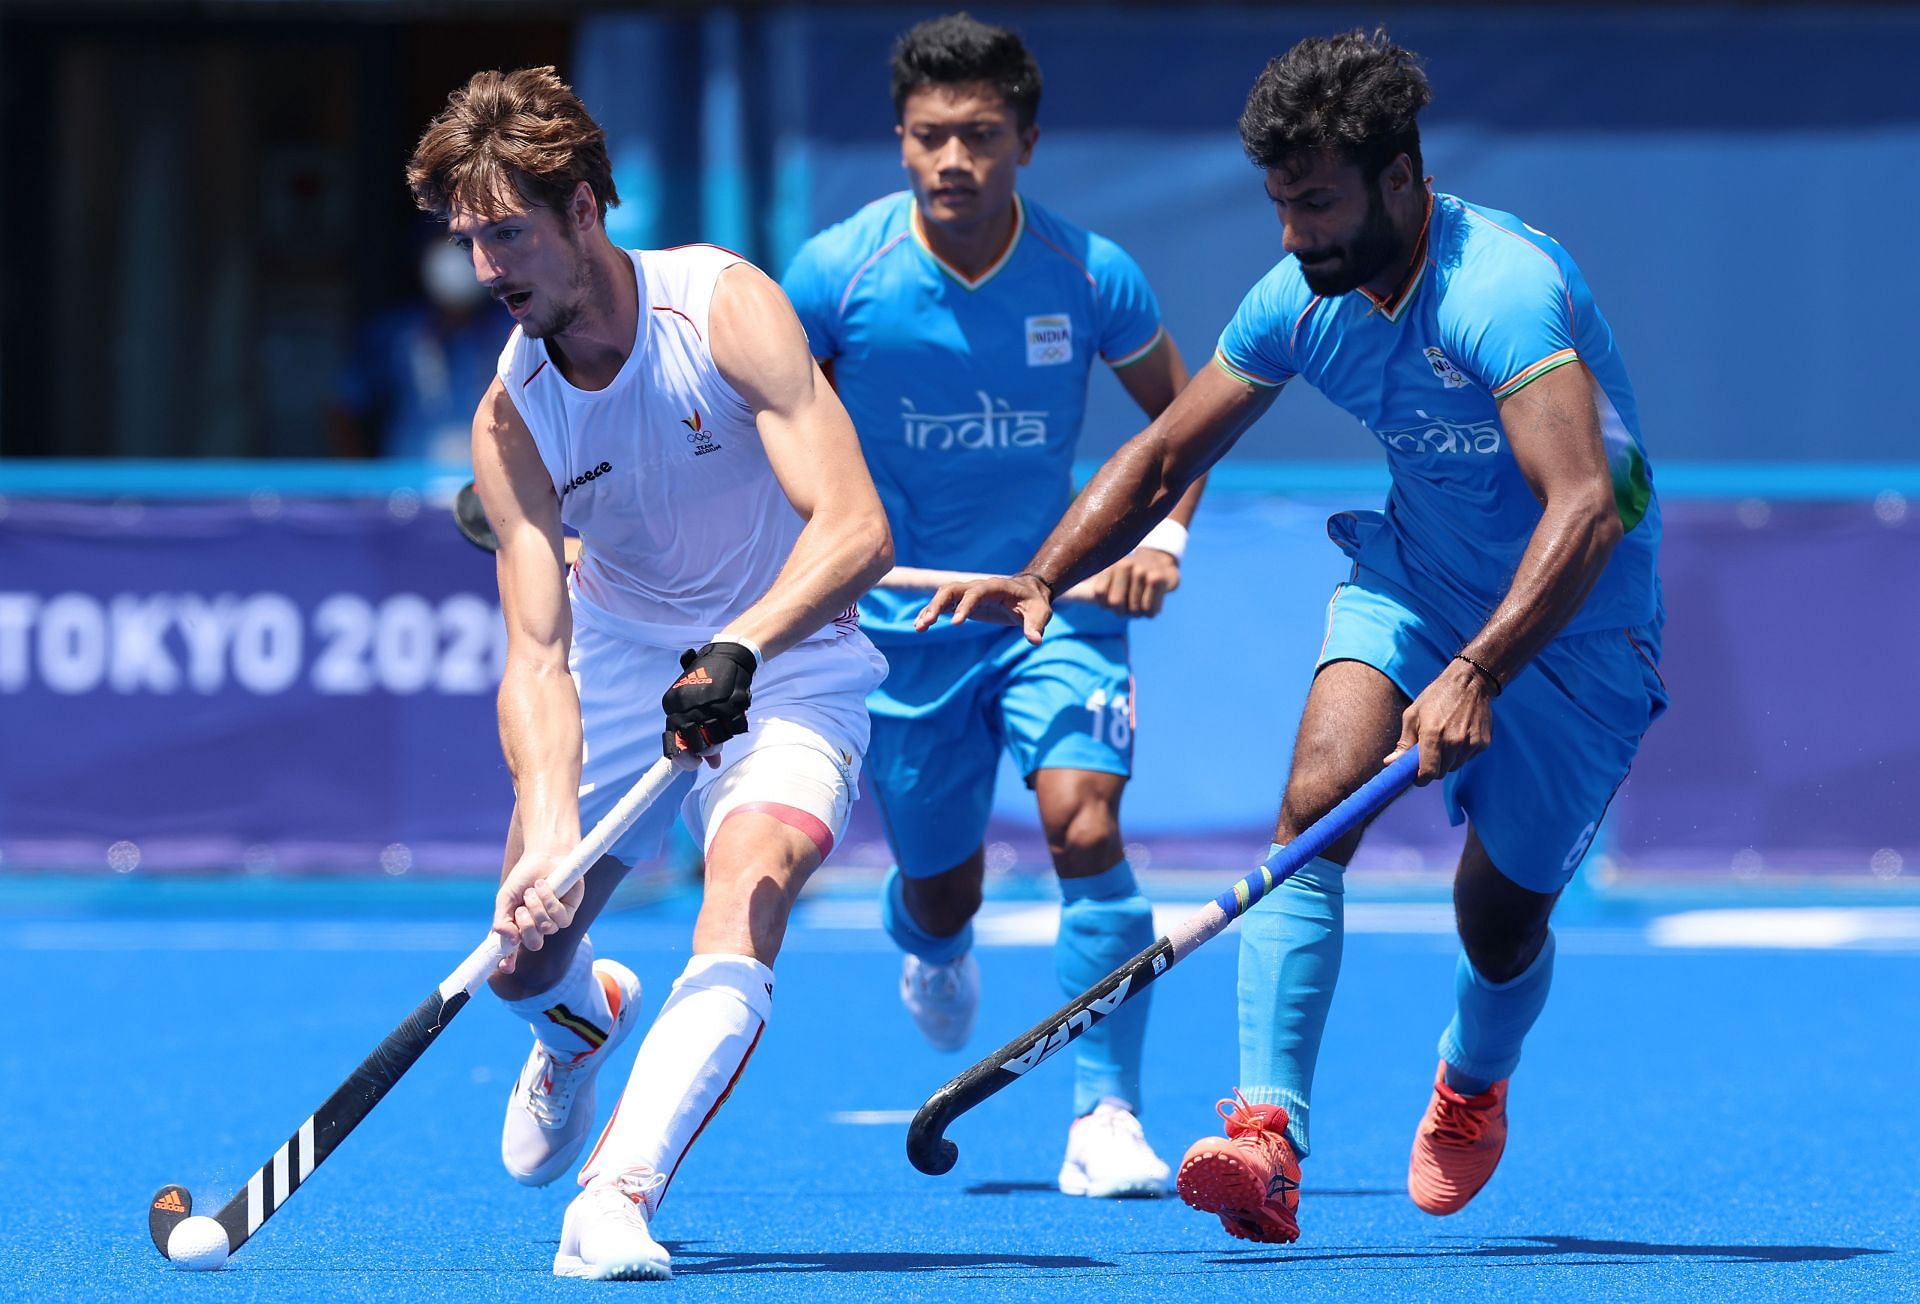 Belgium defeated India in the Tokyo Olympics QF